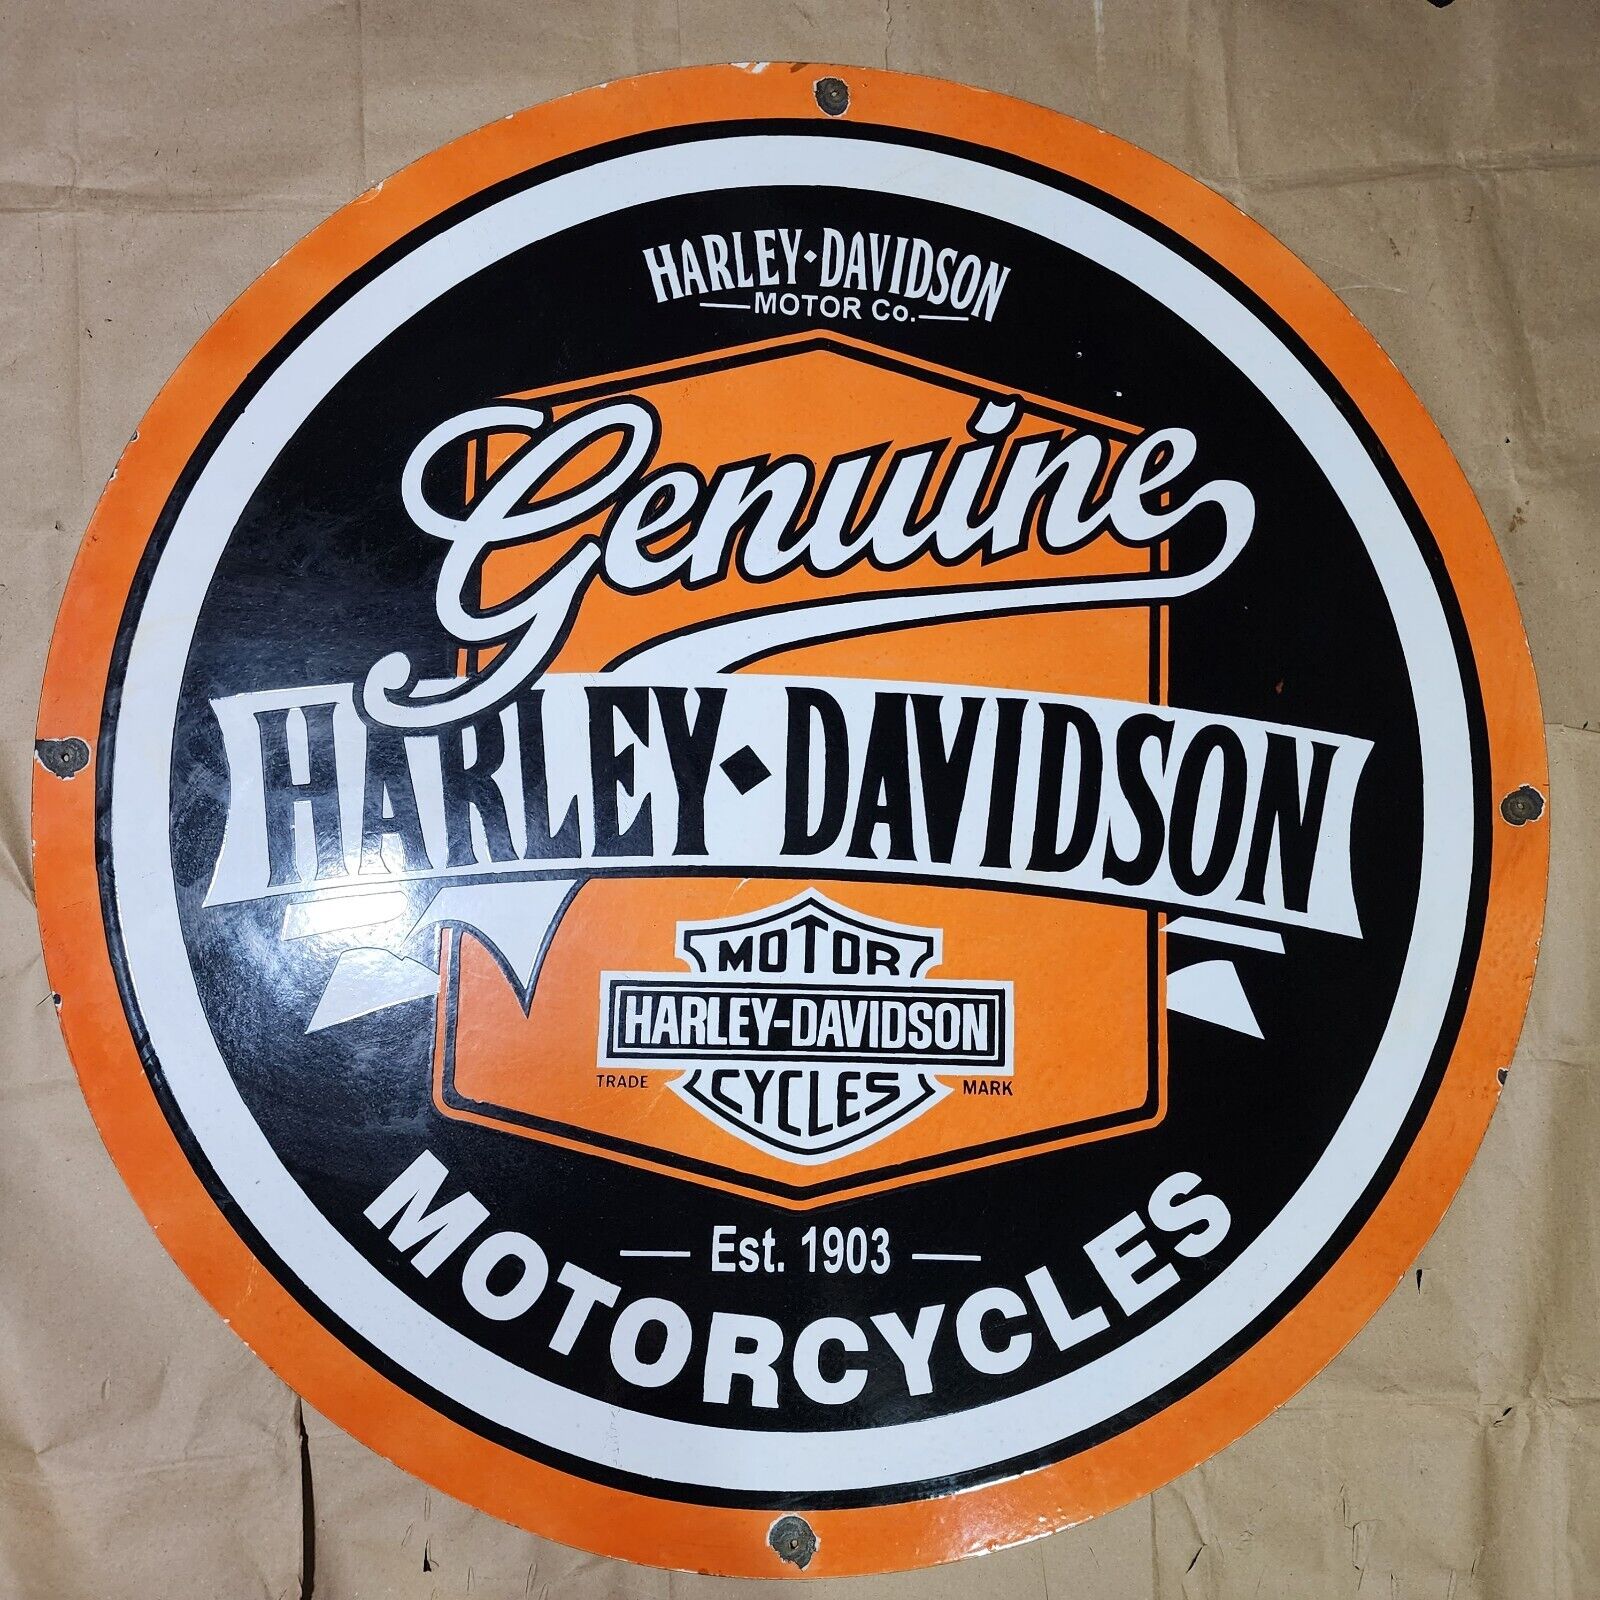 HARLEY GENUINE MOTORCYCLES PORCELAIN ENAMEL SIGN 45 INCHES ROUND